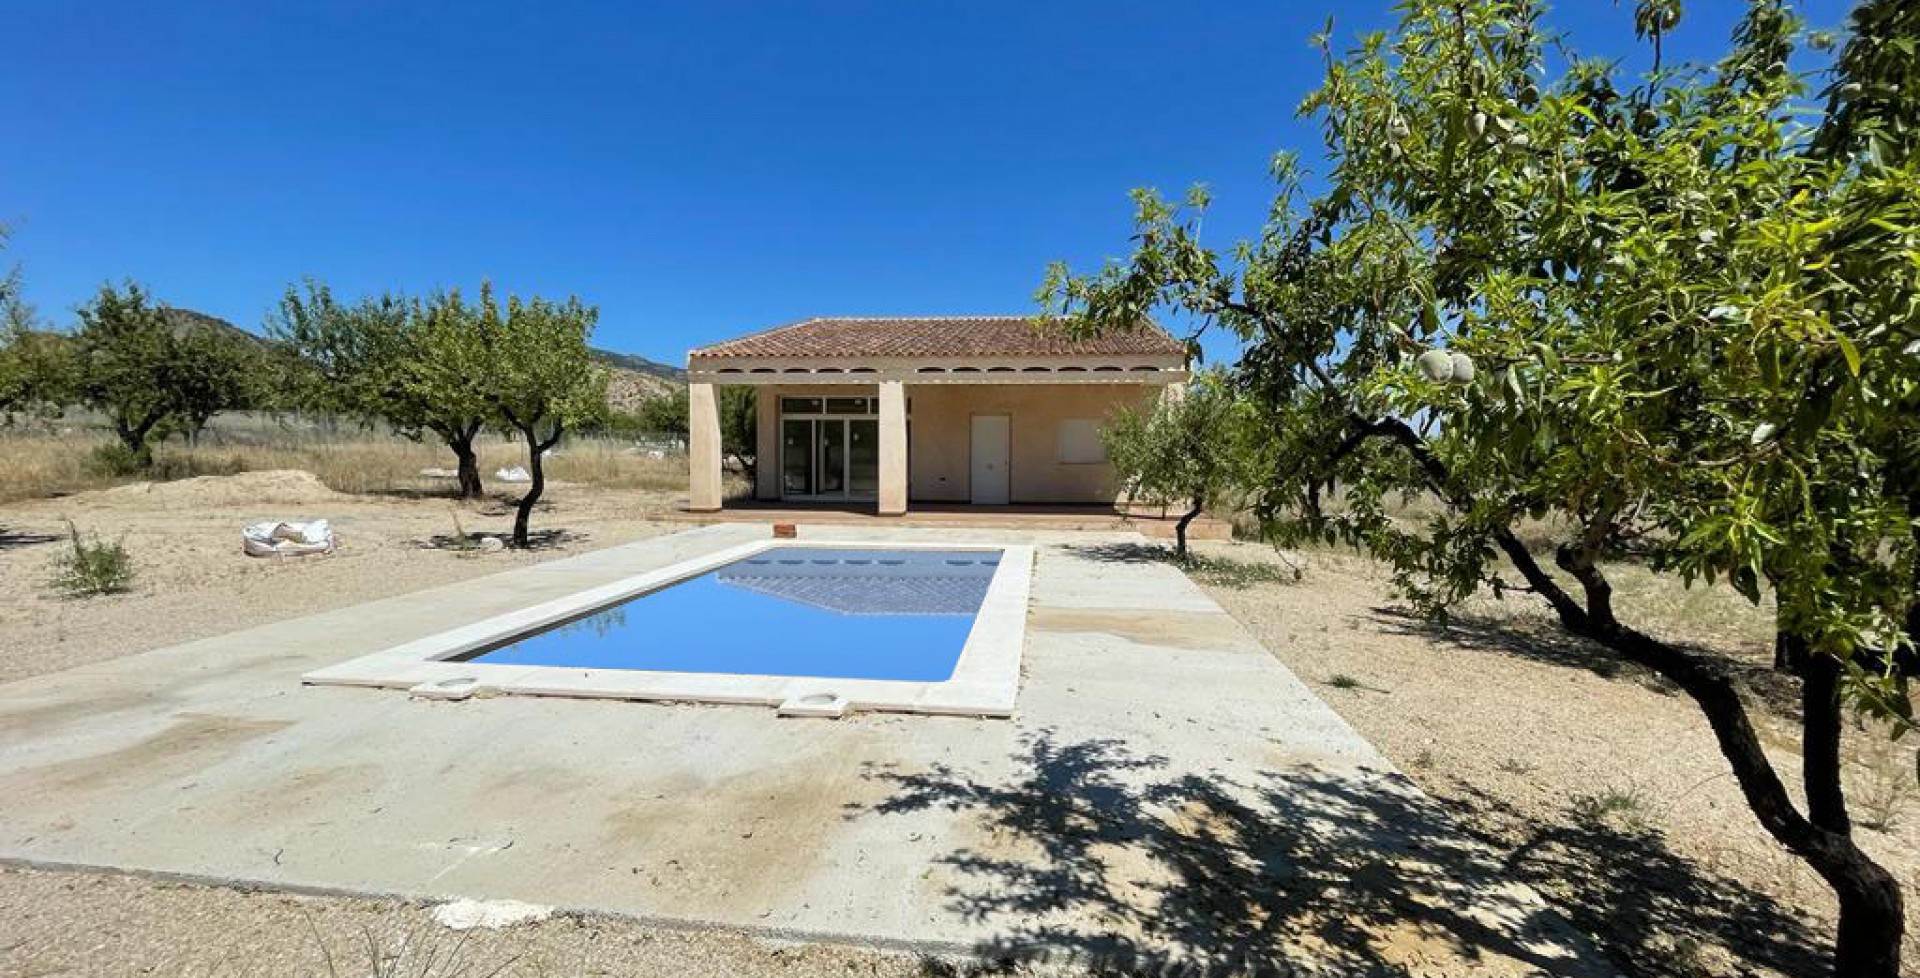 New build villa with large swimming pool, Ricote, Murcia, Spain